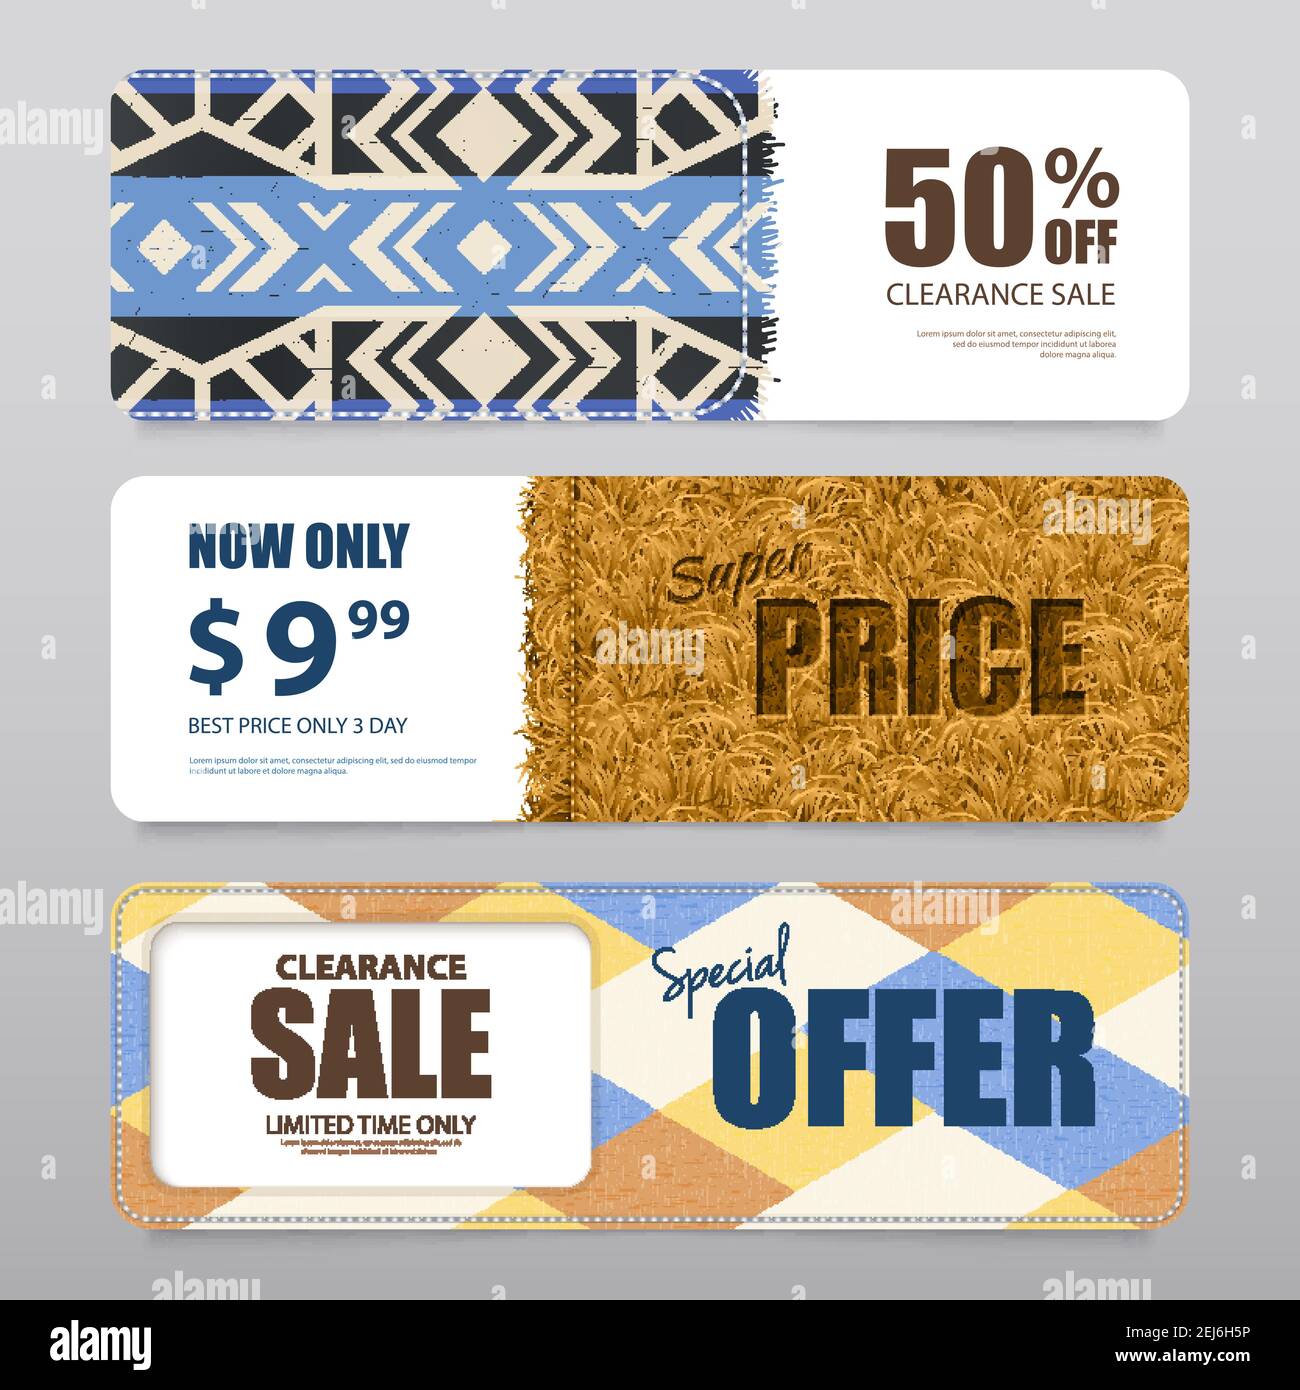 Carpet rugs floor covering sale discount offer texture samples 3 realistic horizontal banners set isolated vector illustration Stock Vector